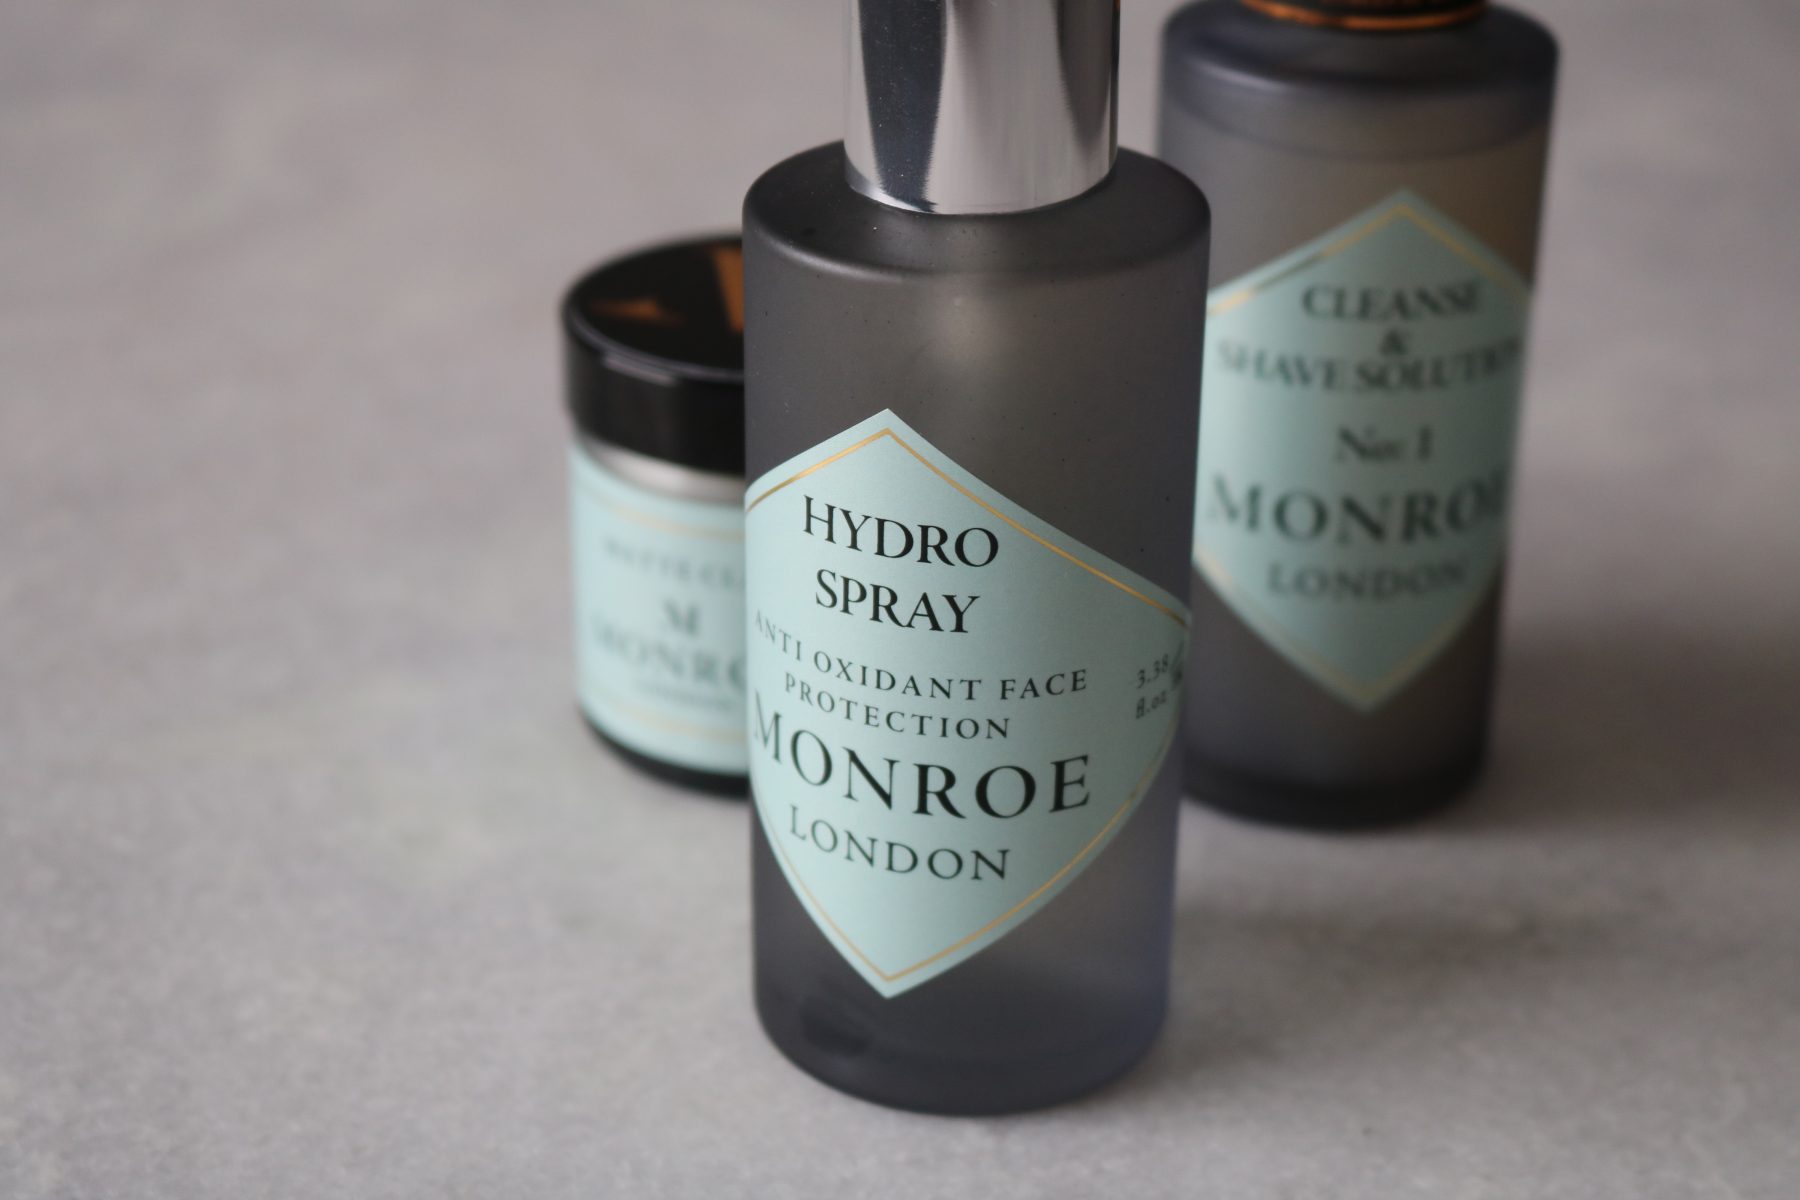 Monroe London's Skincare Is Handcrafted Perfection